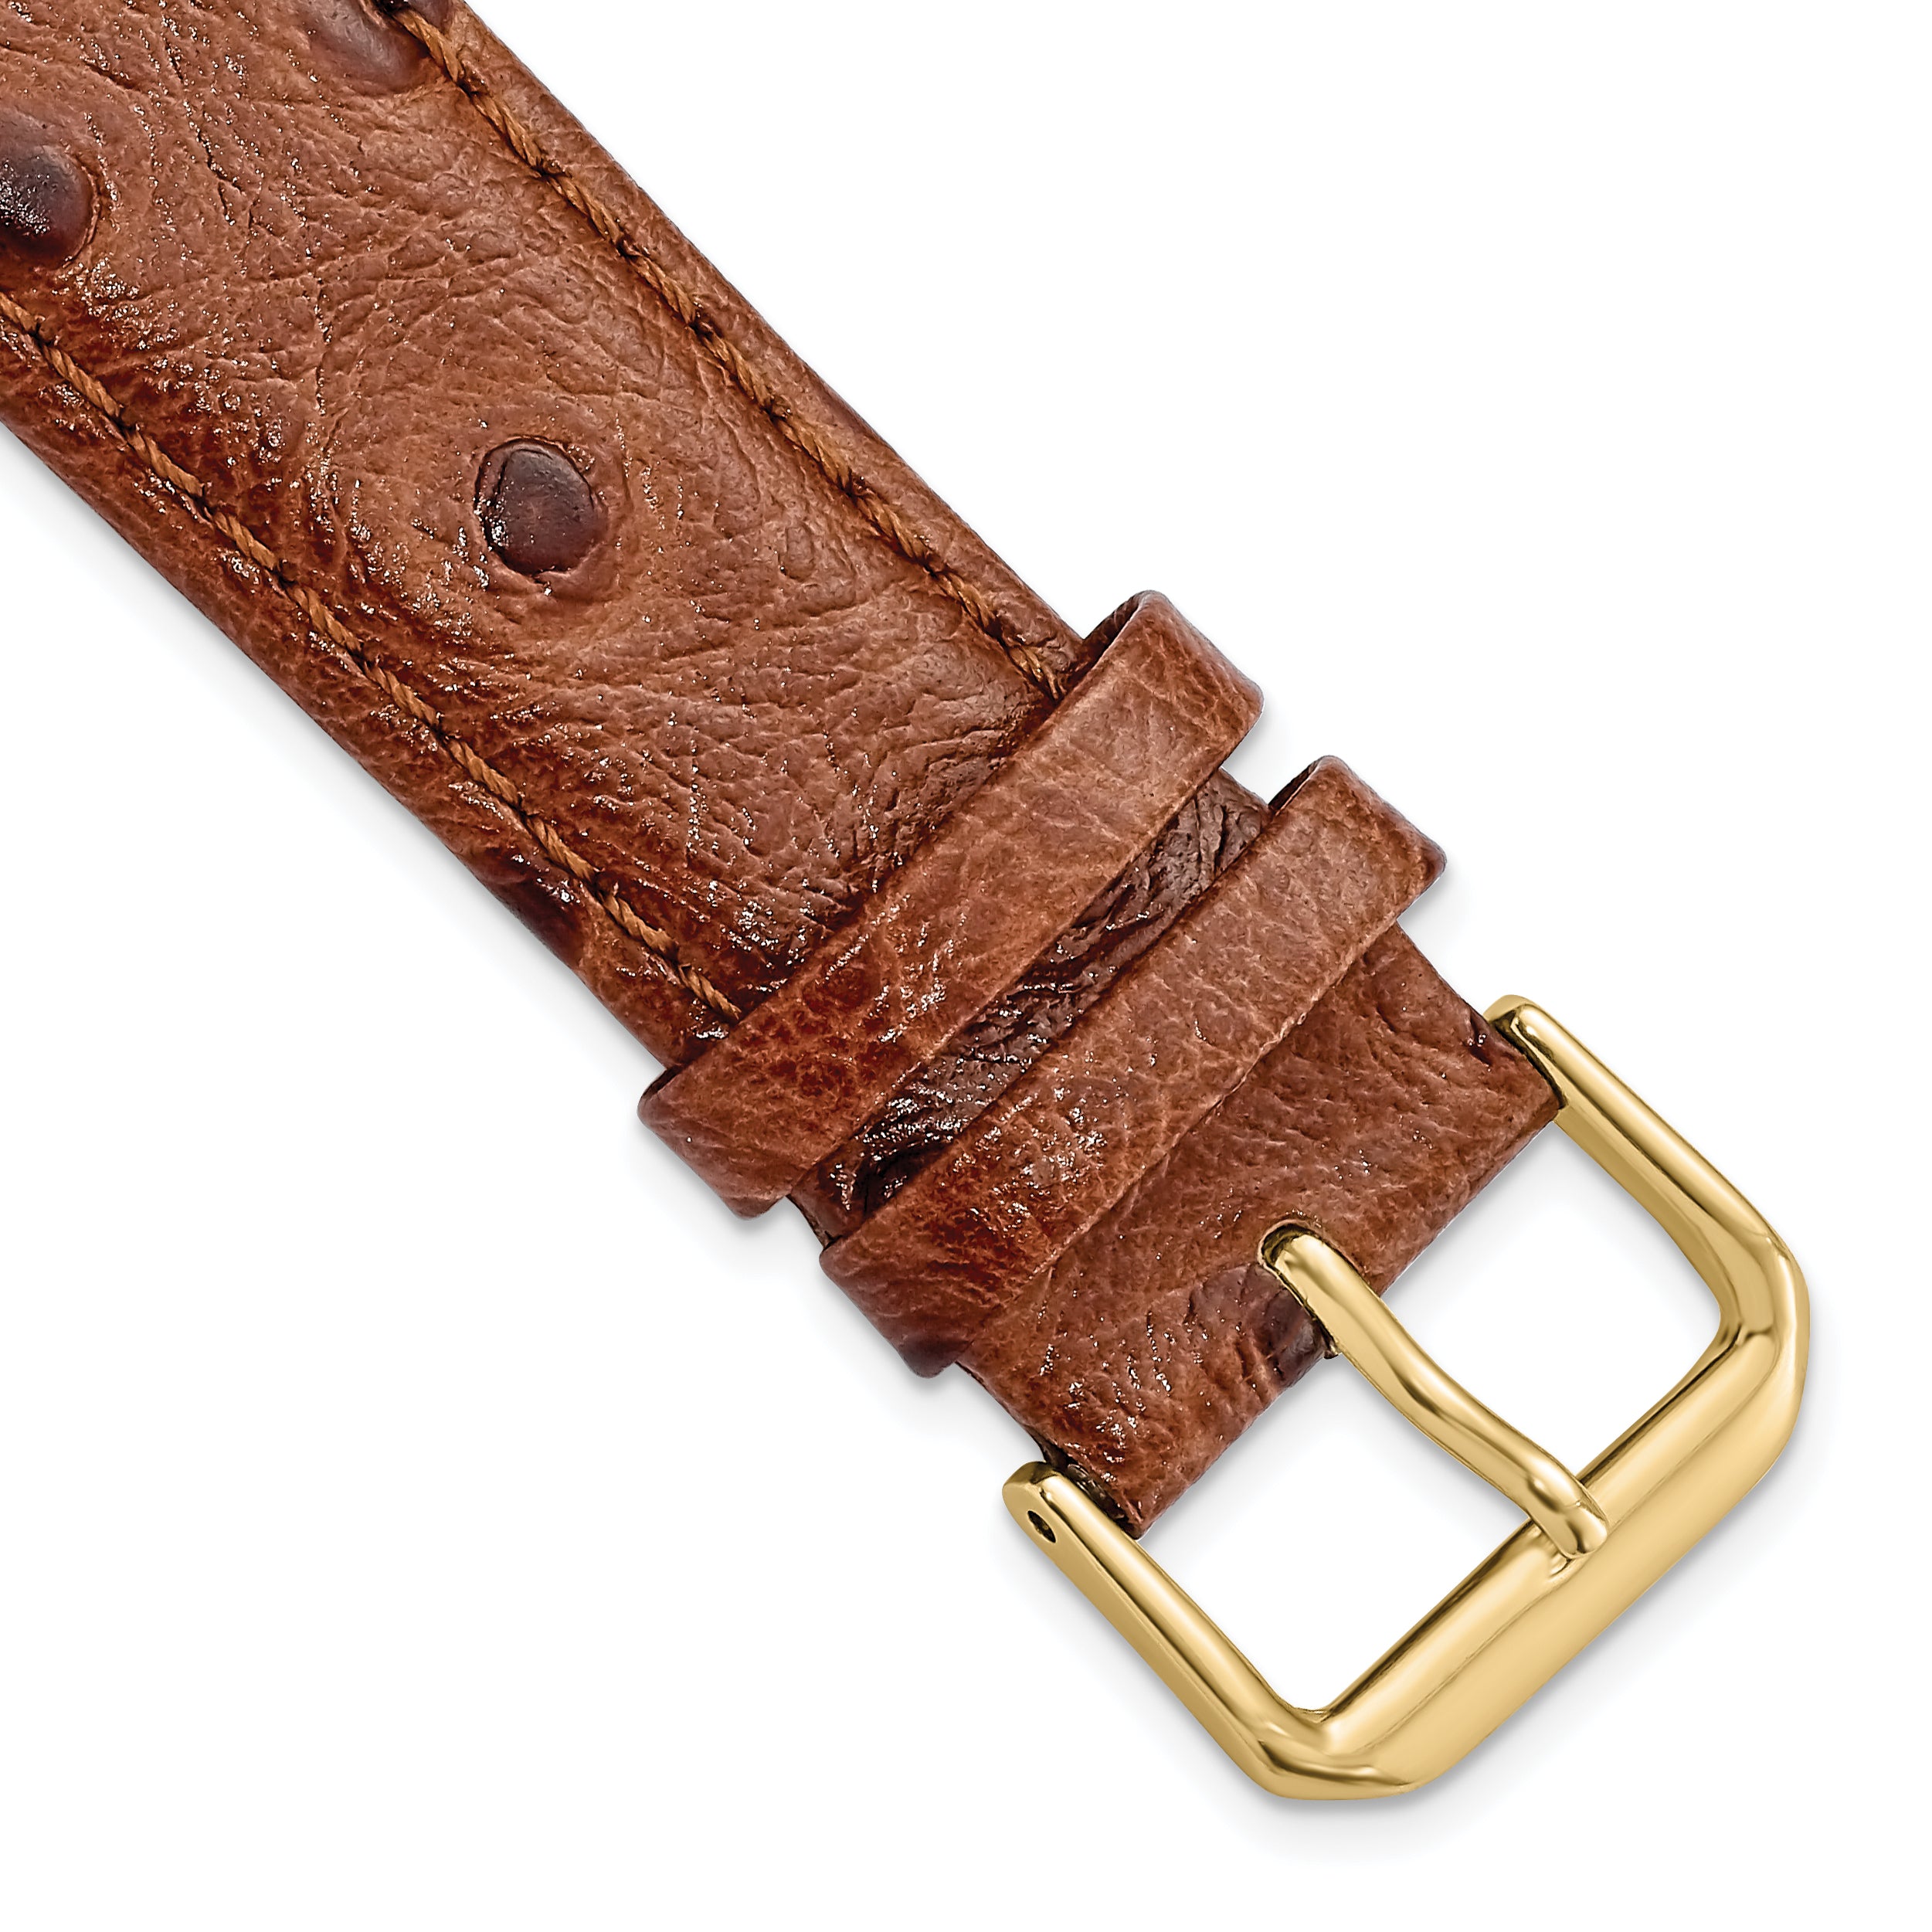 DeBeer 20mm Havana Ostrich Grain Leather with Gold-tone Buckle 7.5 inch Watch Band